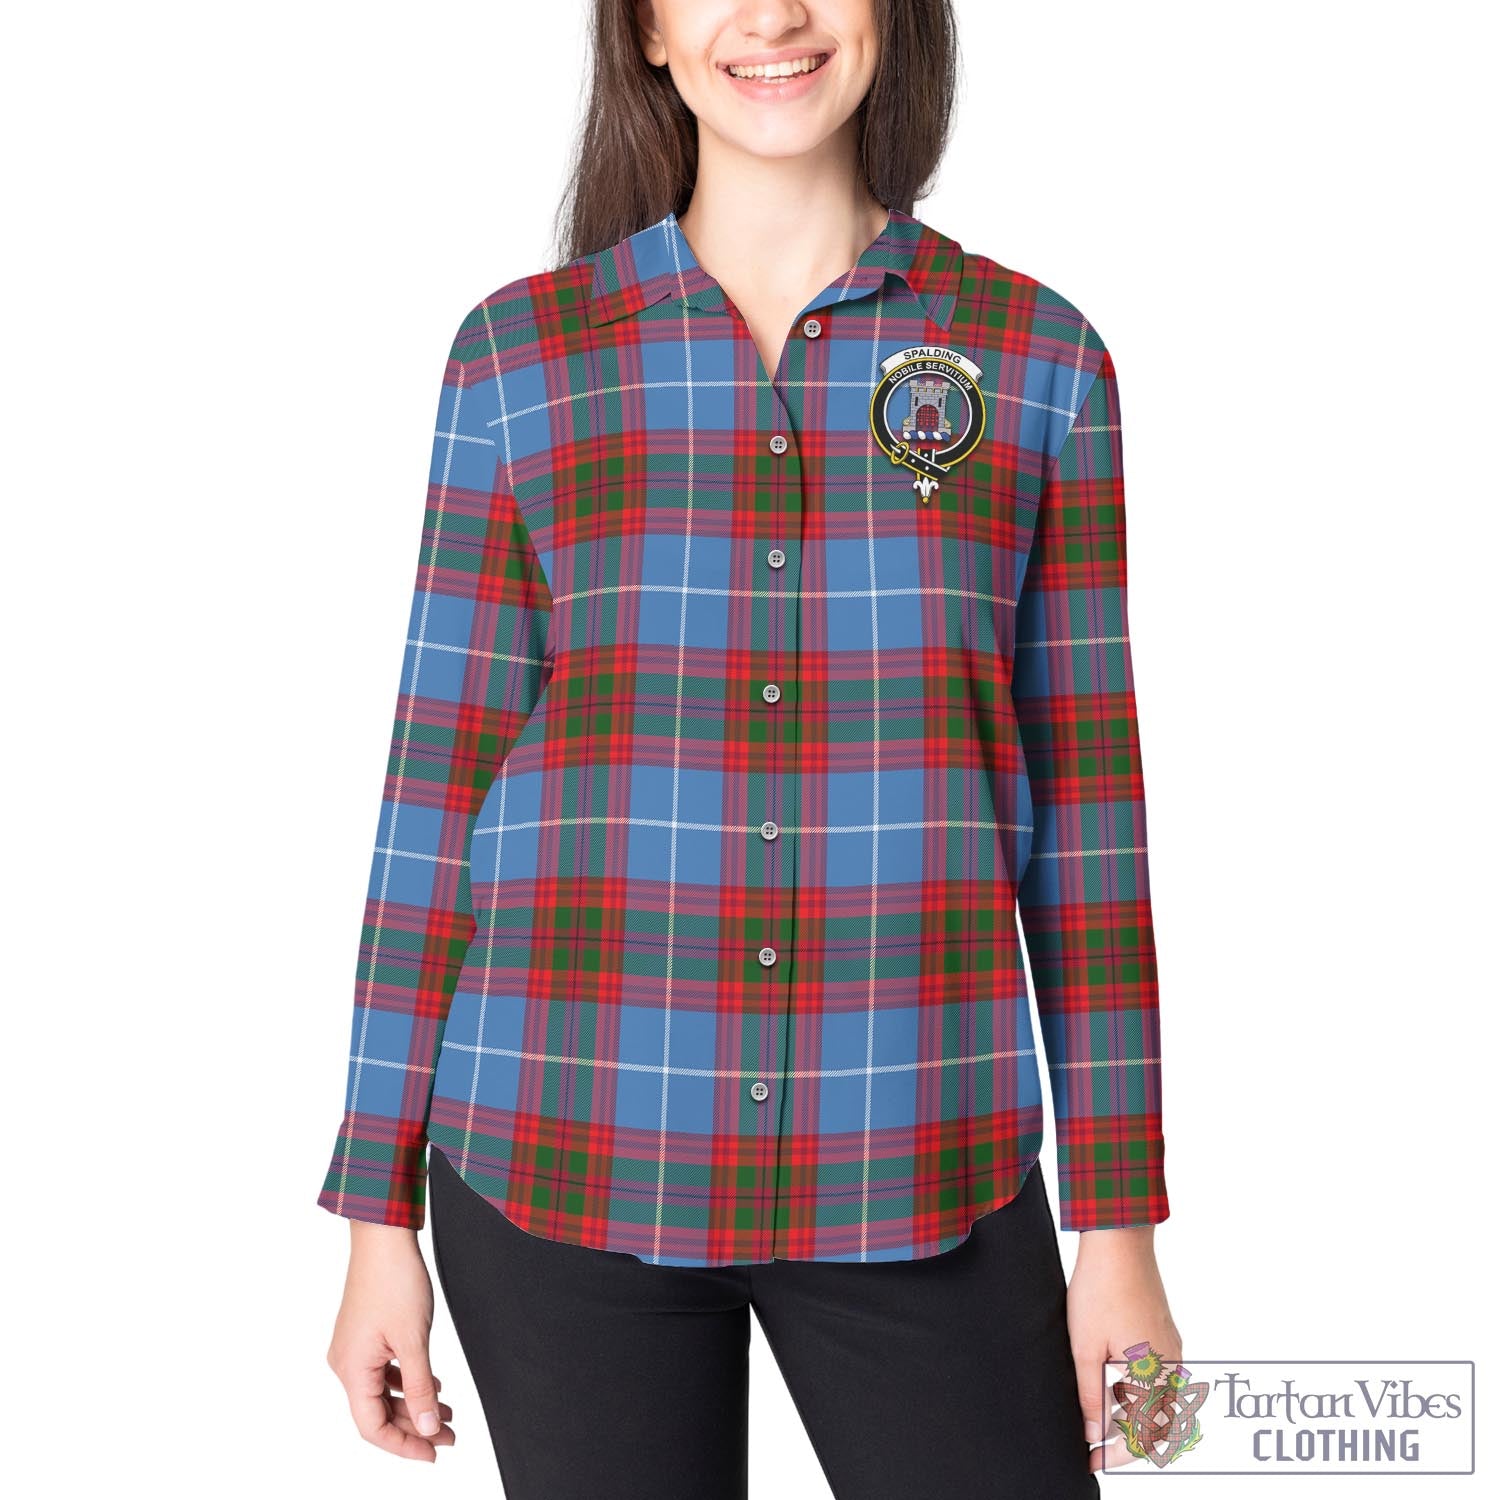 Tartan Vibes Clothing Spalding Tartan Womens Casual Shirt with Family Crest